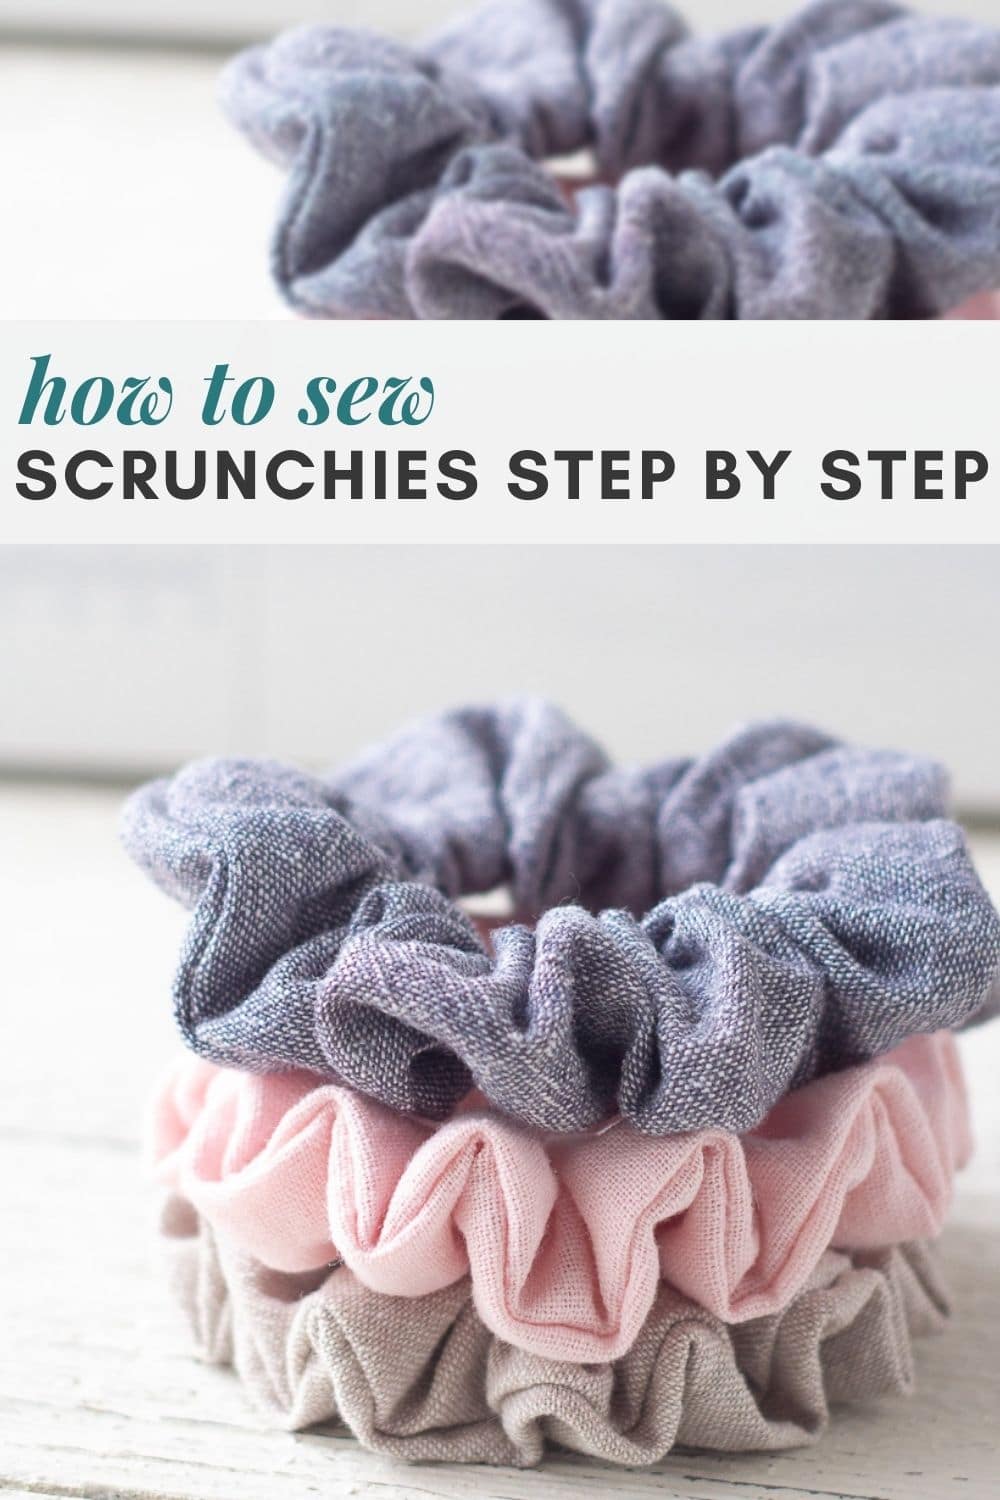 Handmade scrunchies in a stack with the words, "How to Sew Scrunchies Step by Step."